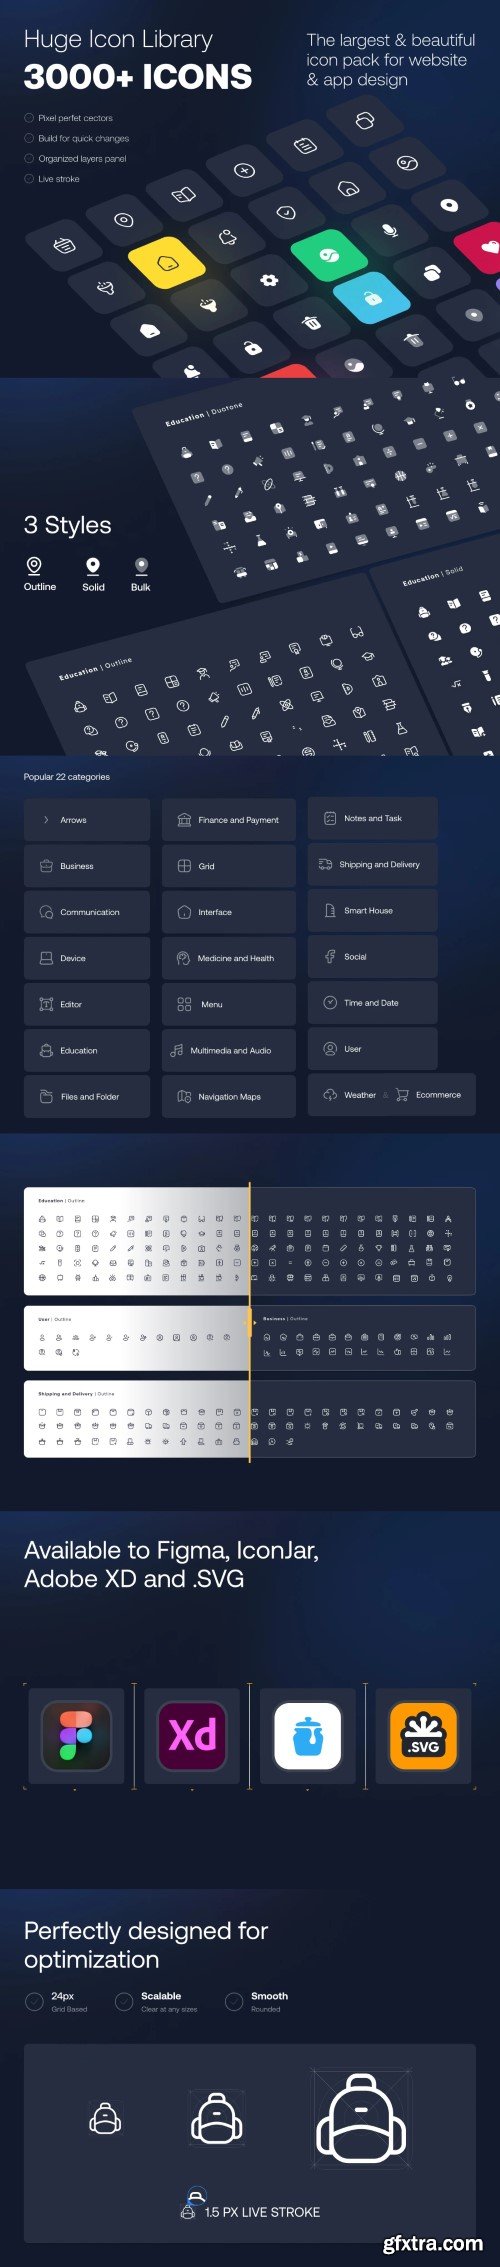 Huge Icon Pack | 3,000+ Icons Set